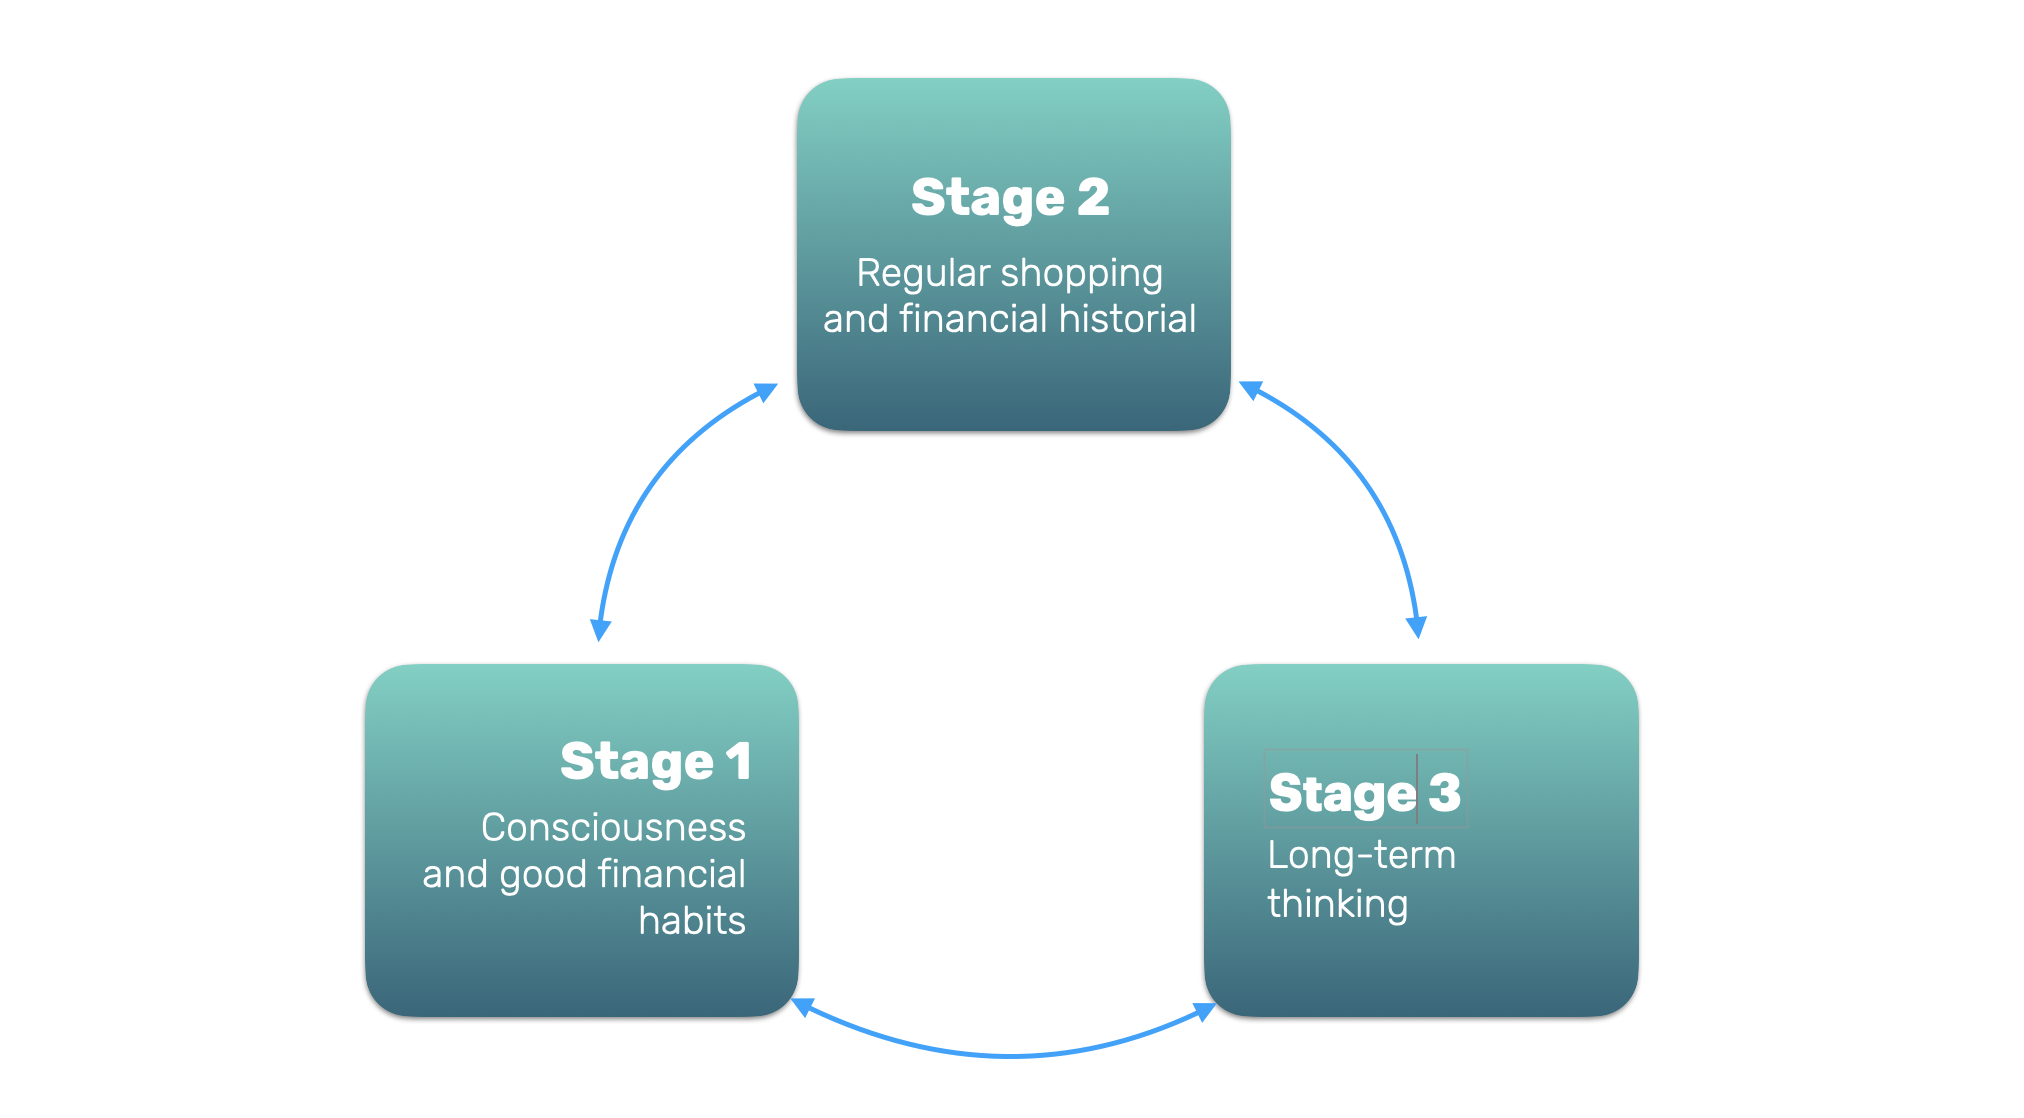 These are the main three stages of how the program would be divided